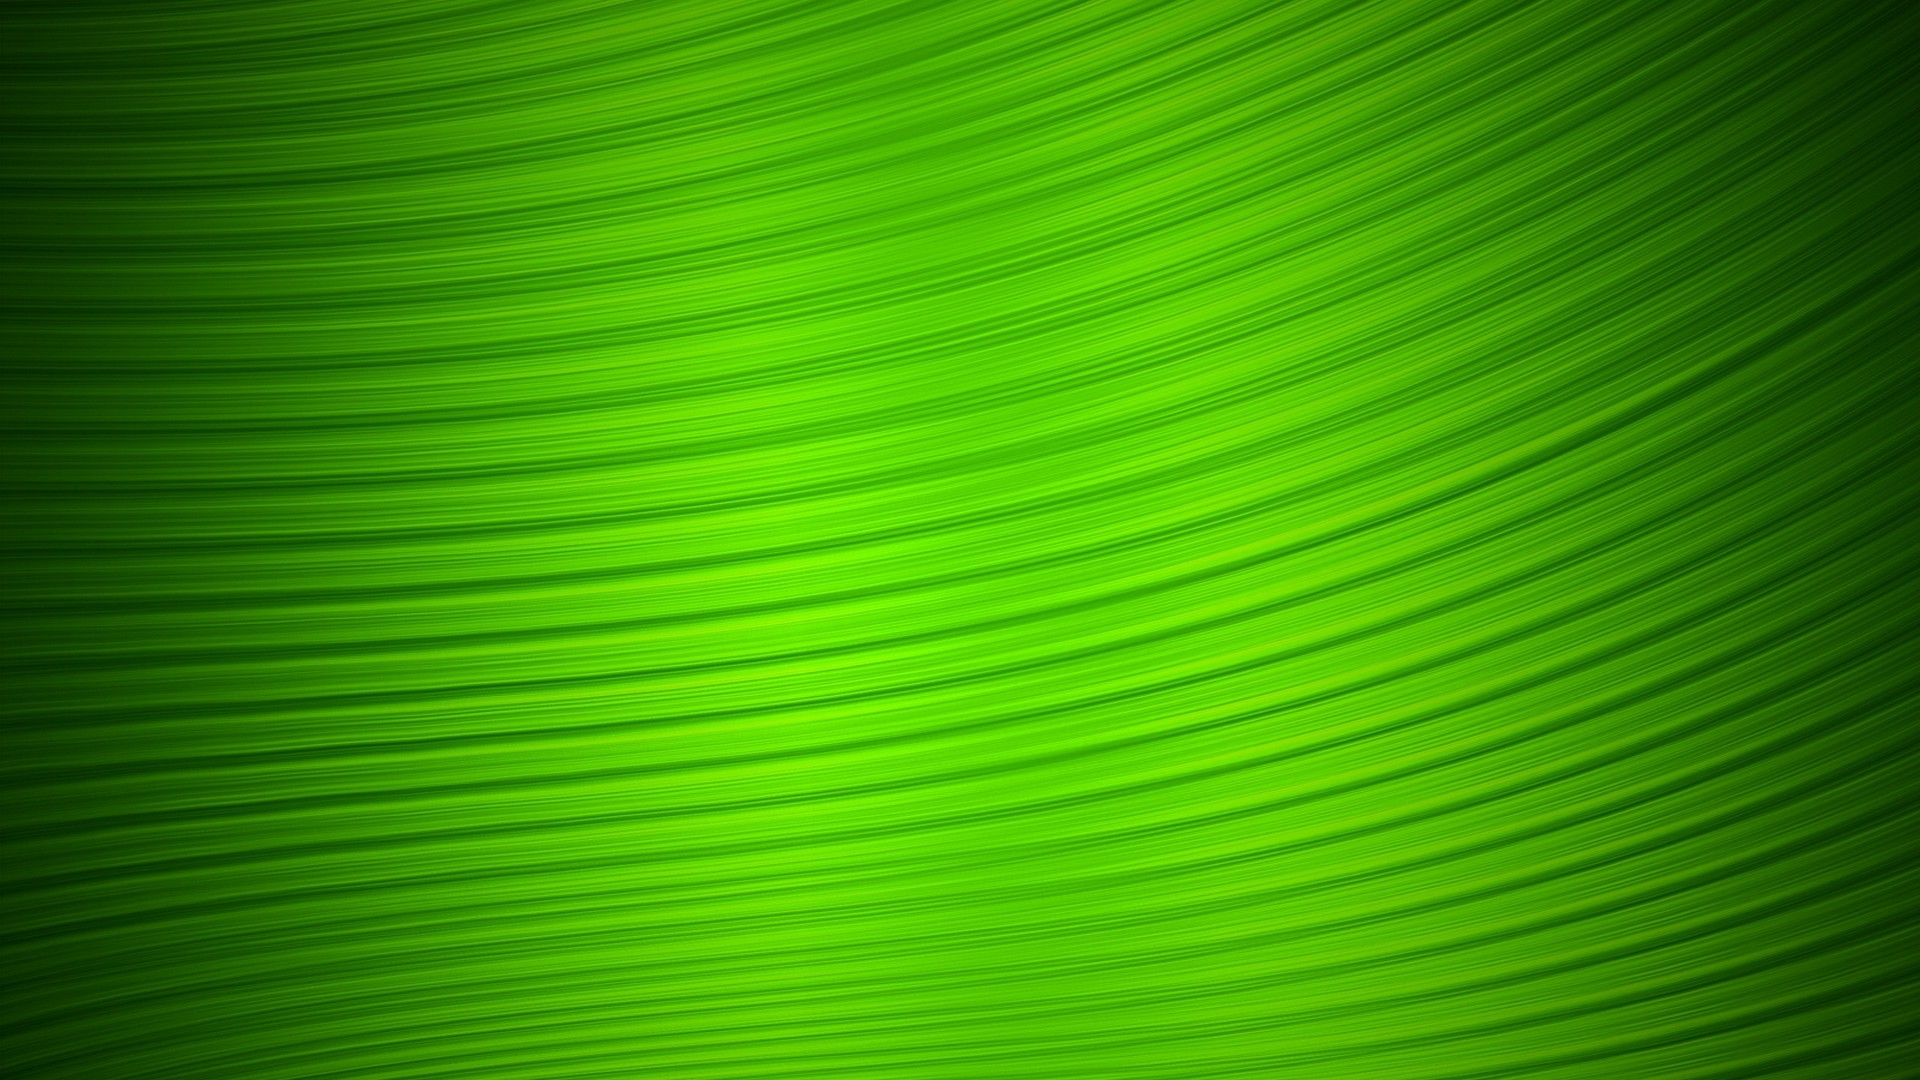 Desktop Wallpaper Green Colour with resolution 1920X1080 pixel. You can use this wallpaper as background for your desktop Computer Screensavers, Android or iPhone smartphones